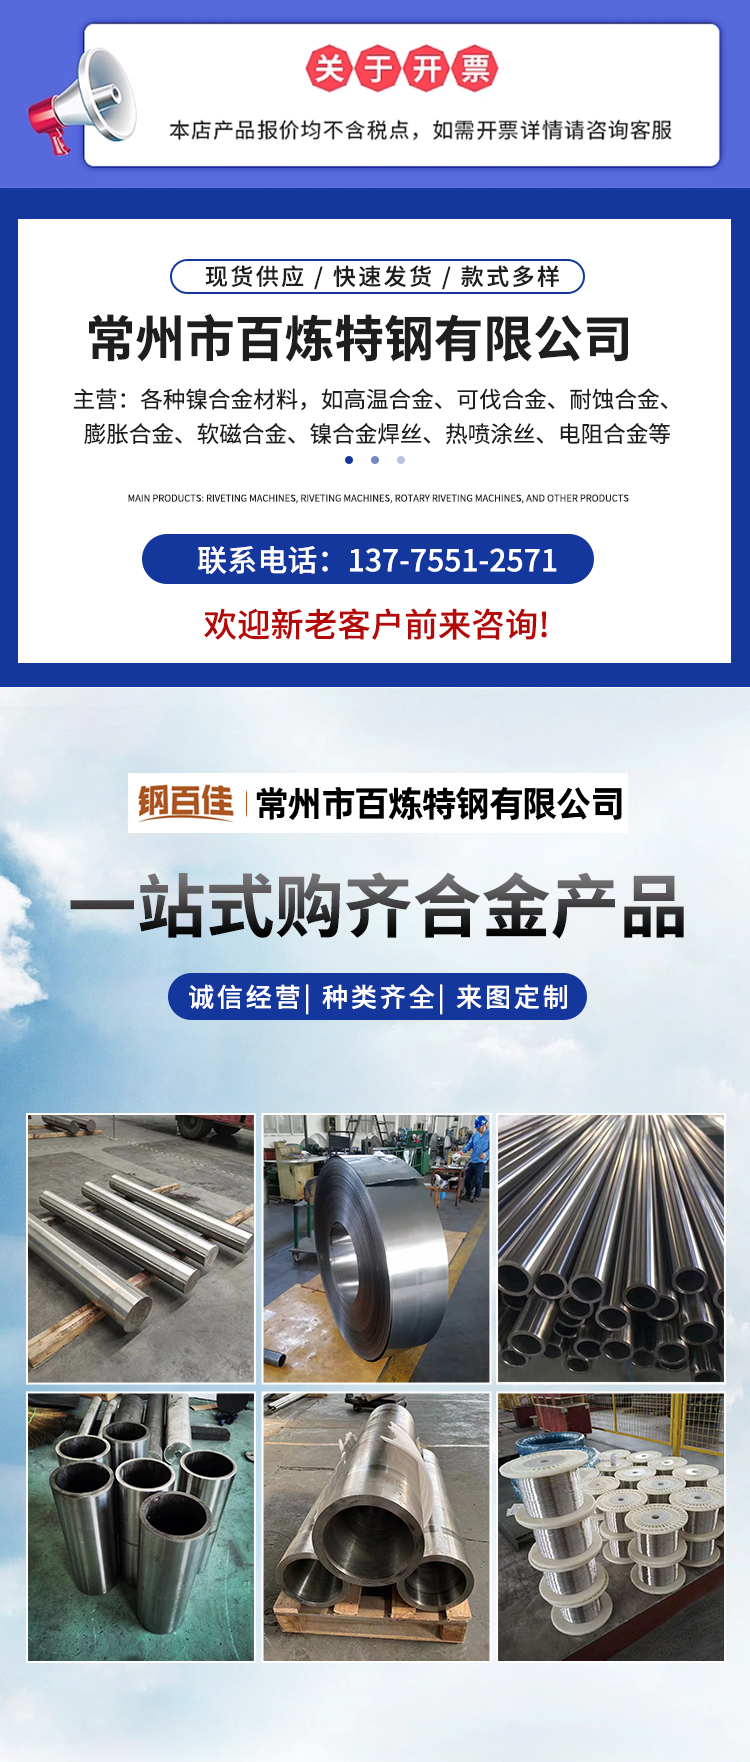 Kovar alloy seamless capillary tube with metallic luster, no oxidation, no hydrogenation, no discoloration, and no burrs